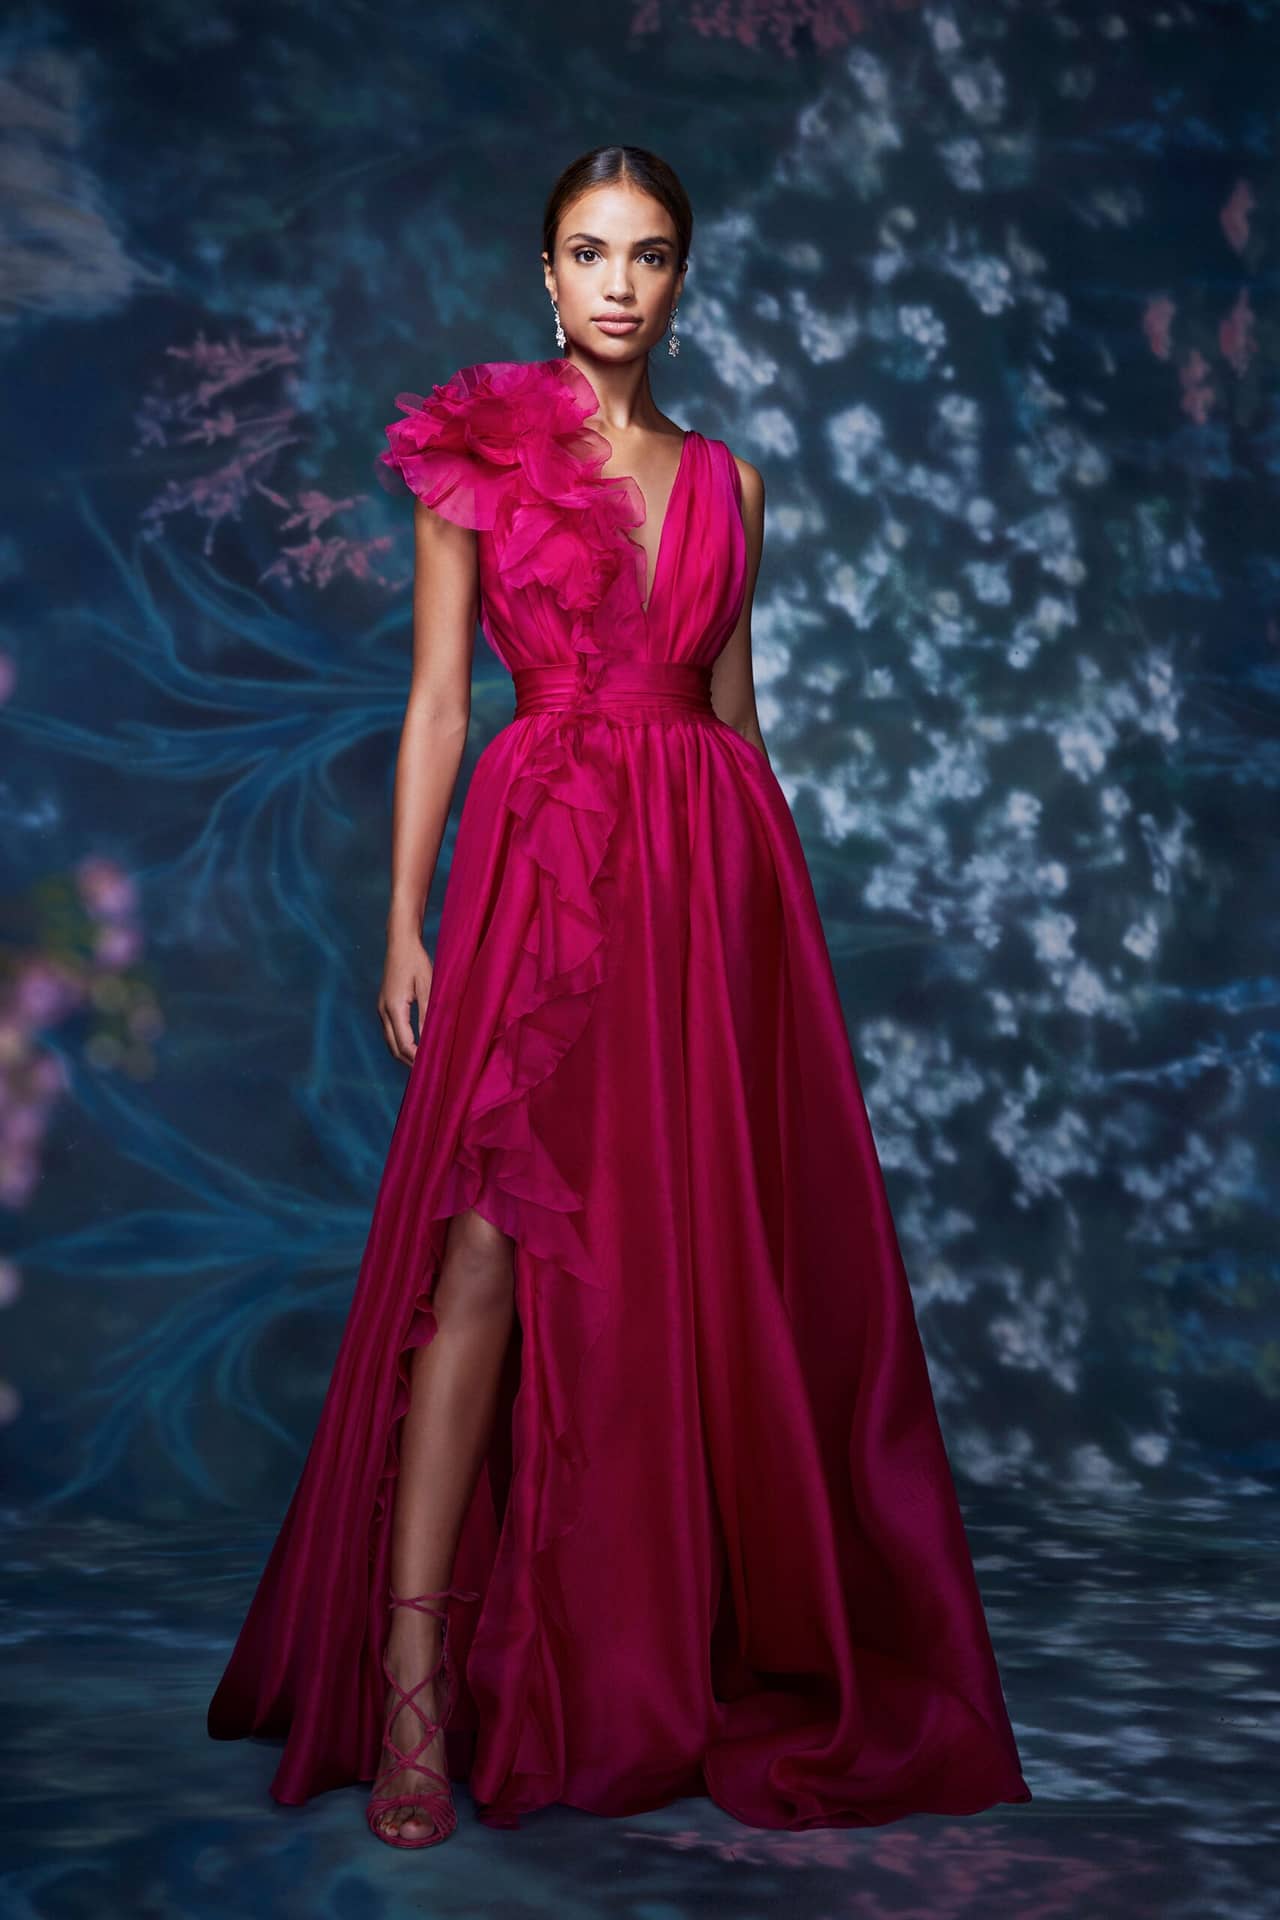 Rosa Lampone - Marchesa Ready-to-Wear Spring 2021